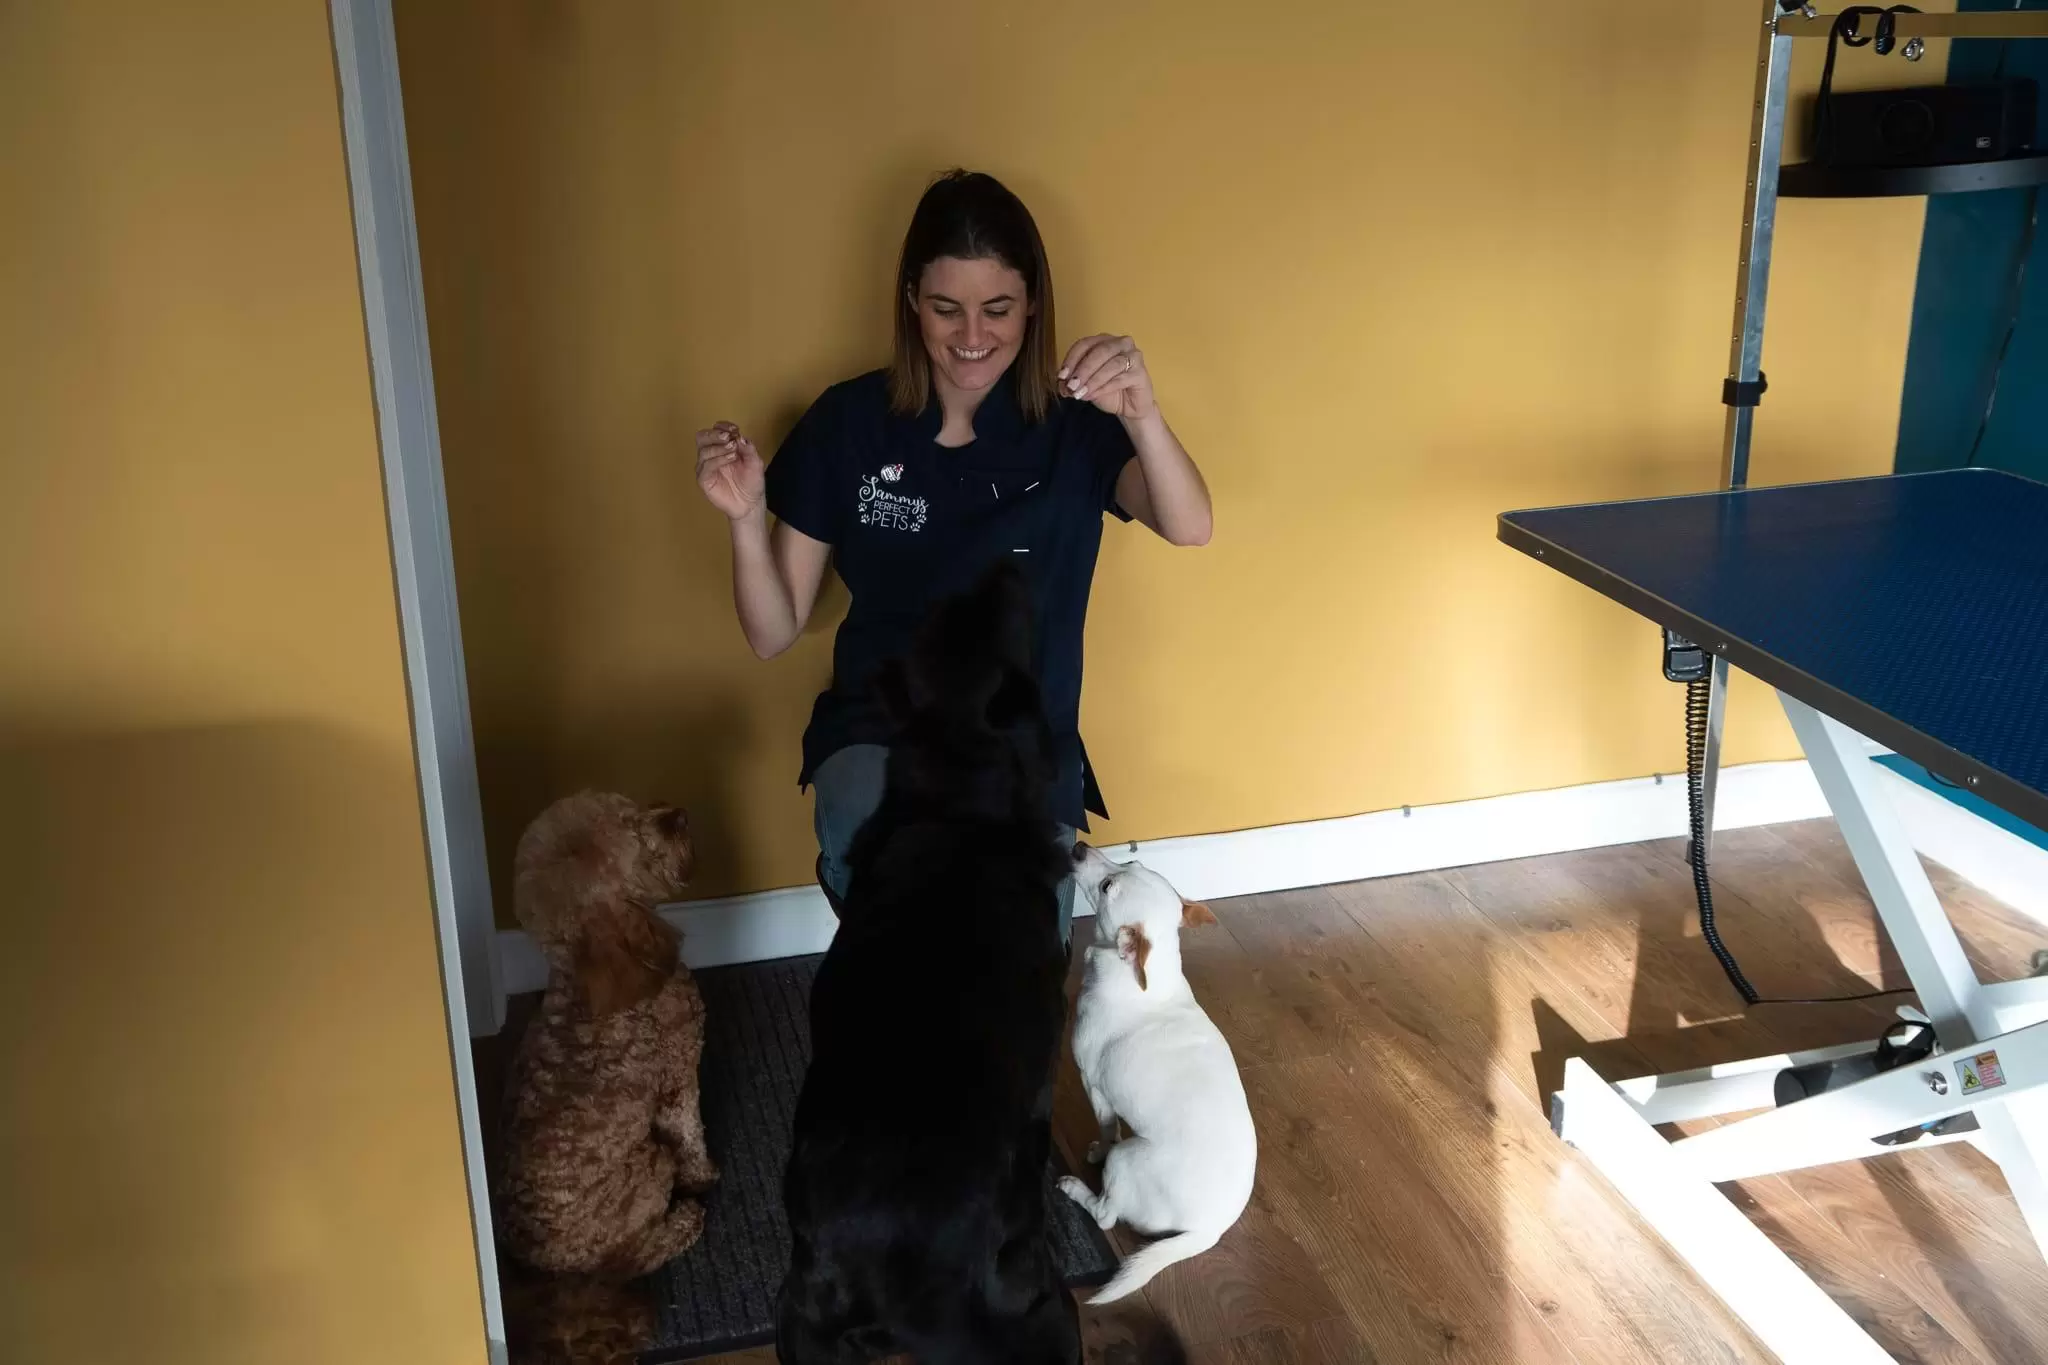 Sammy giving her dogs some treats